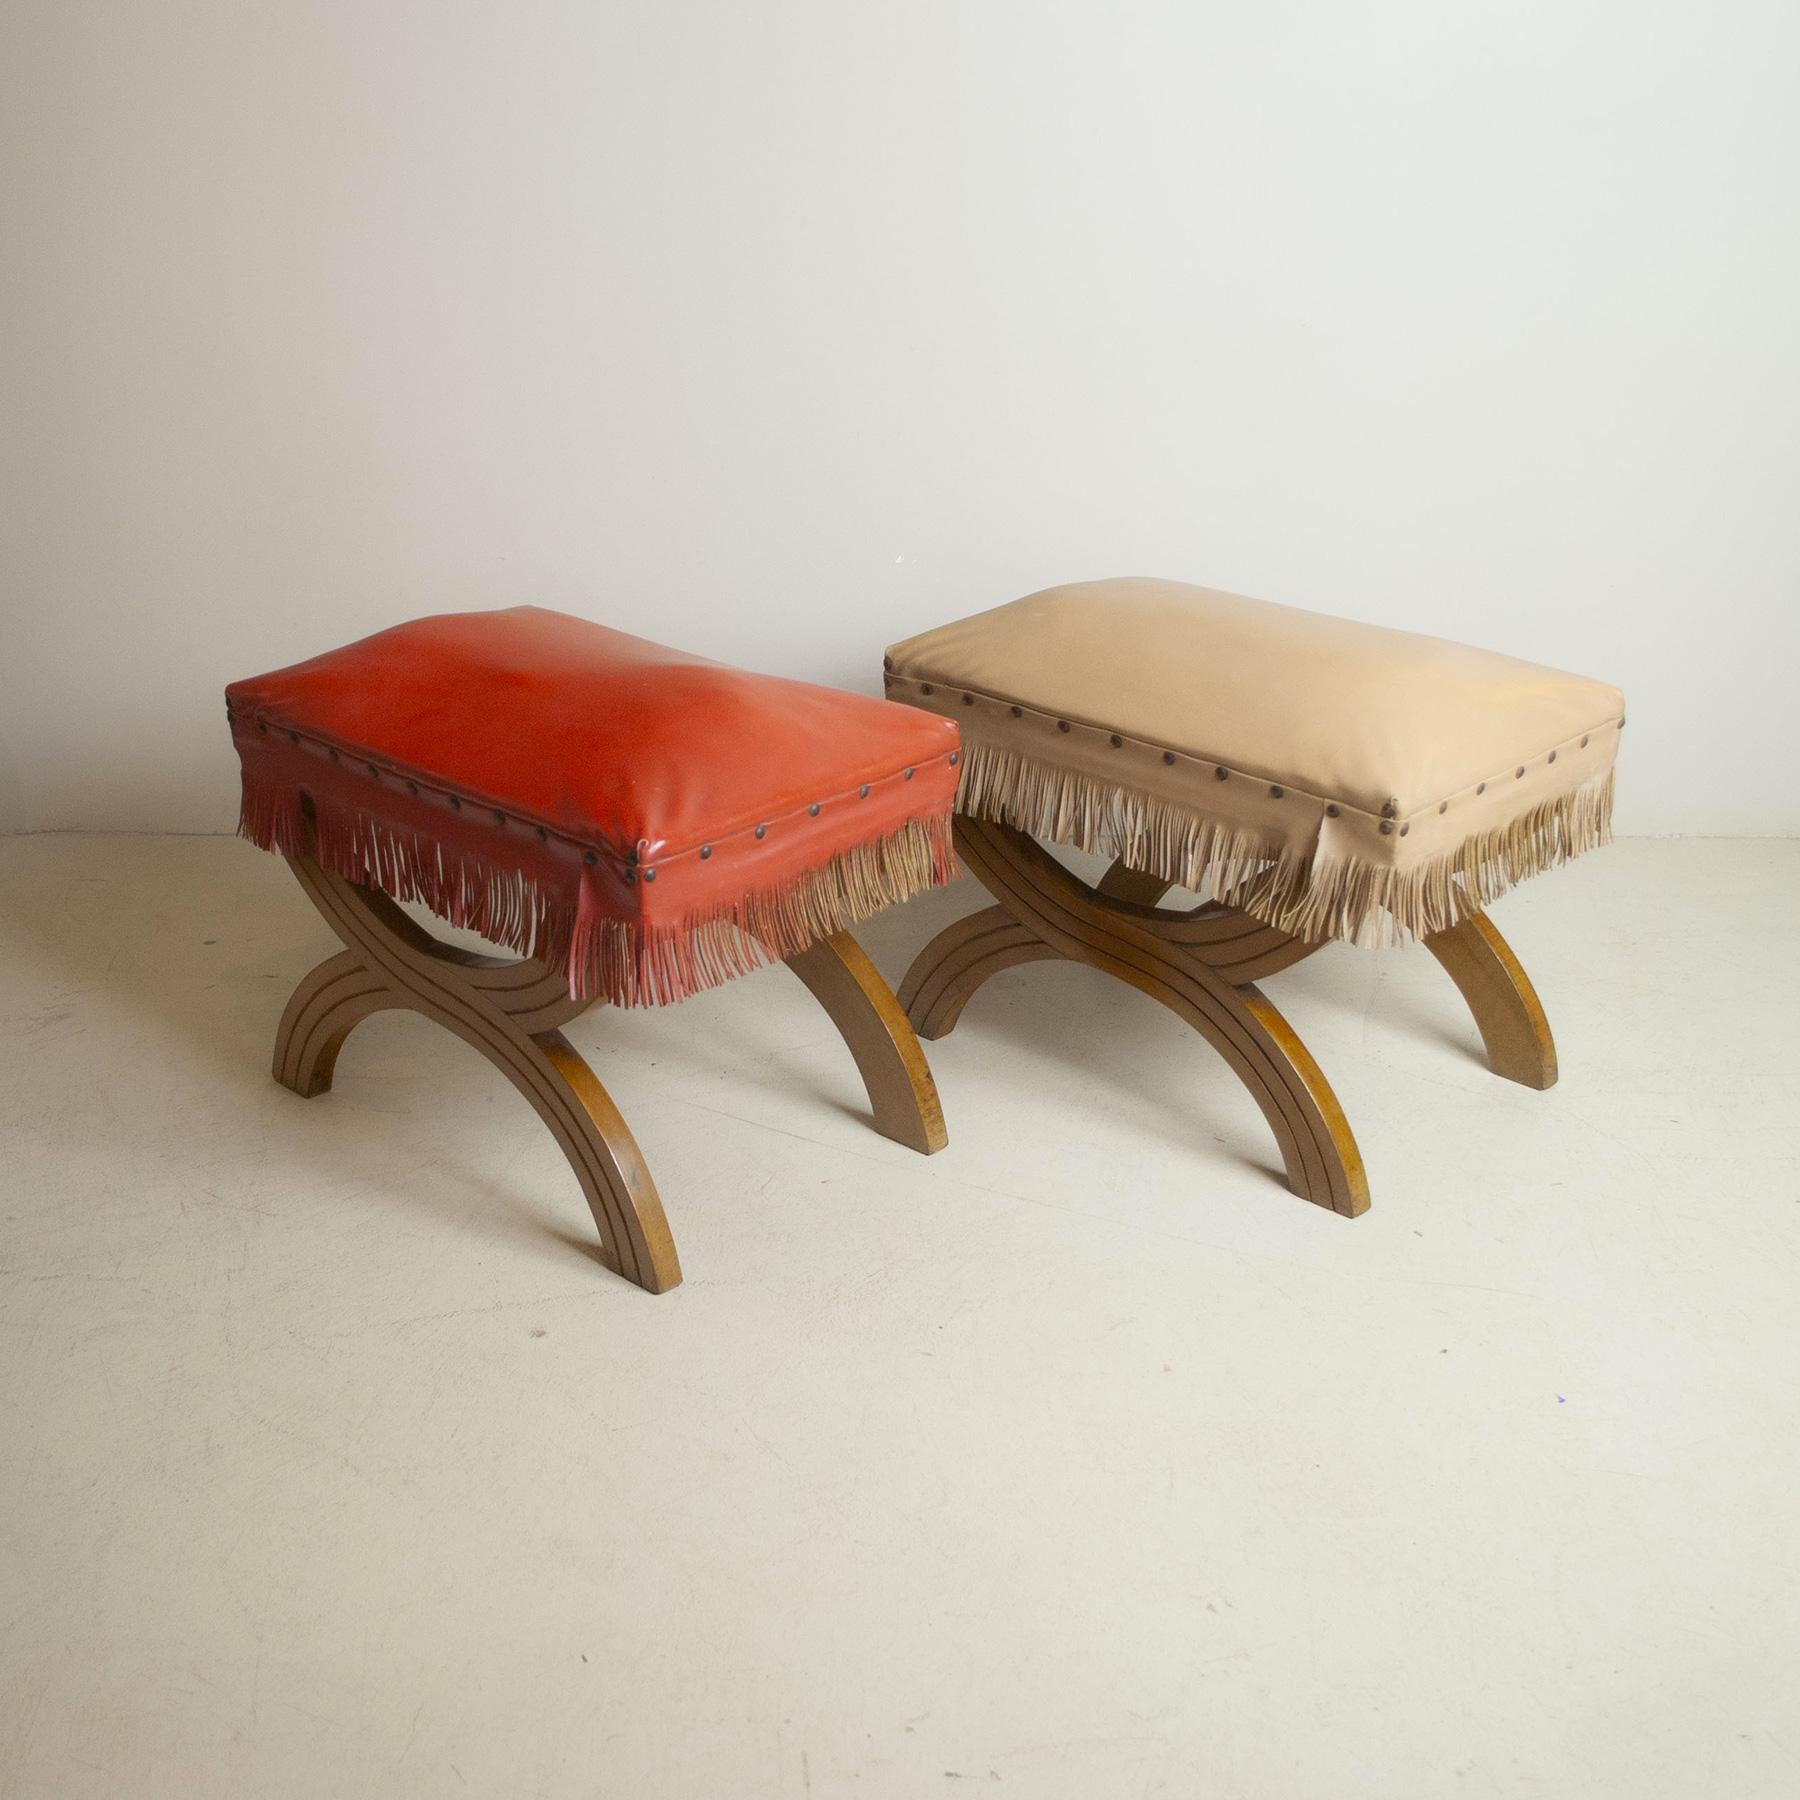 Faux Leather Gio Ponti in the Style Pair of Wooden Stools from the 1960s For Sale